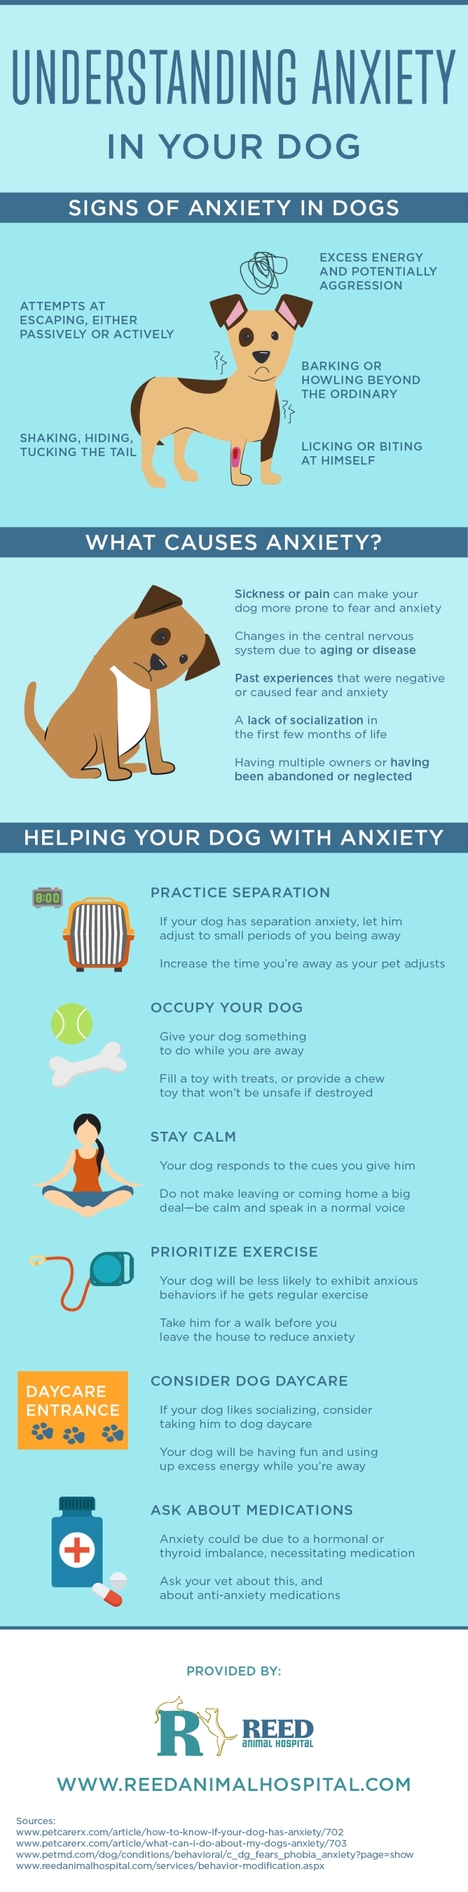 Understanding Anxiety in Your Dog